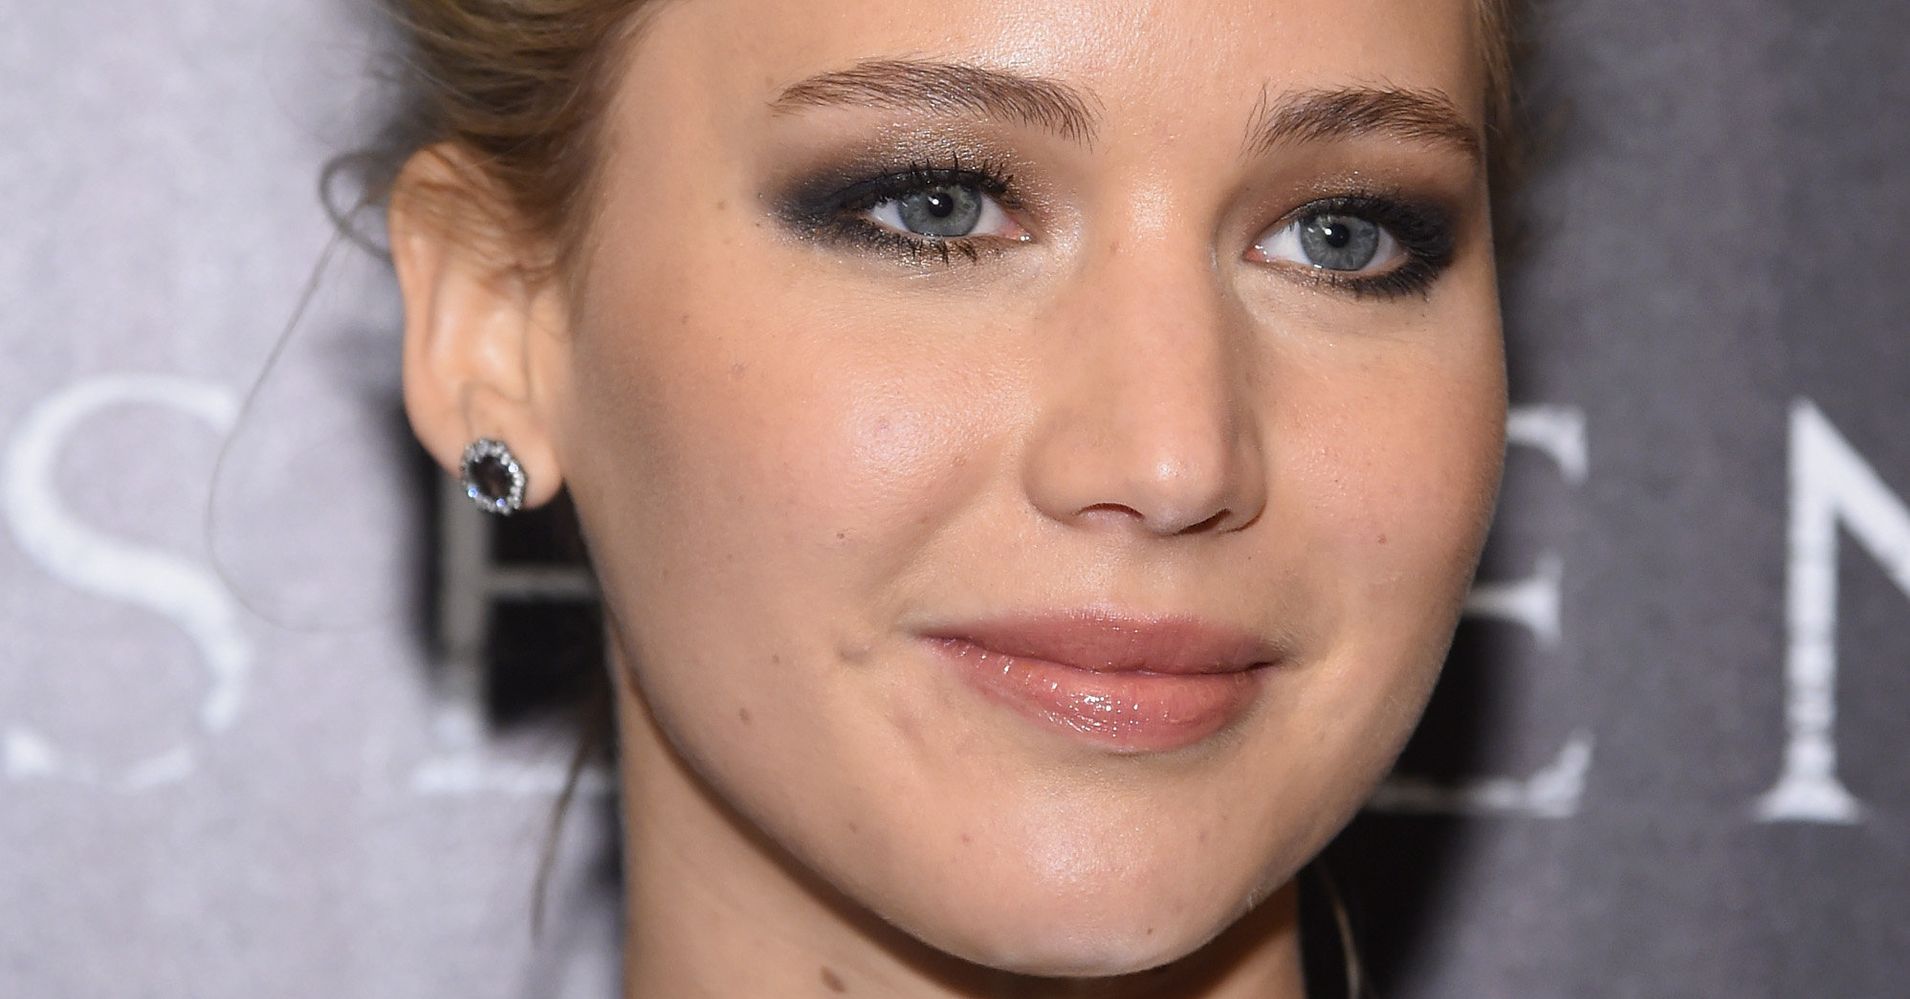 the most majestic makeup for grey eyes | huffpost life